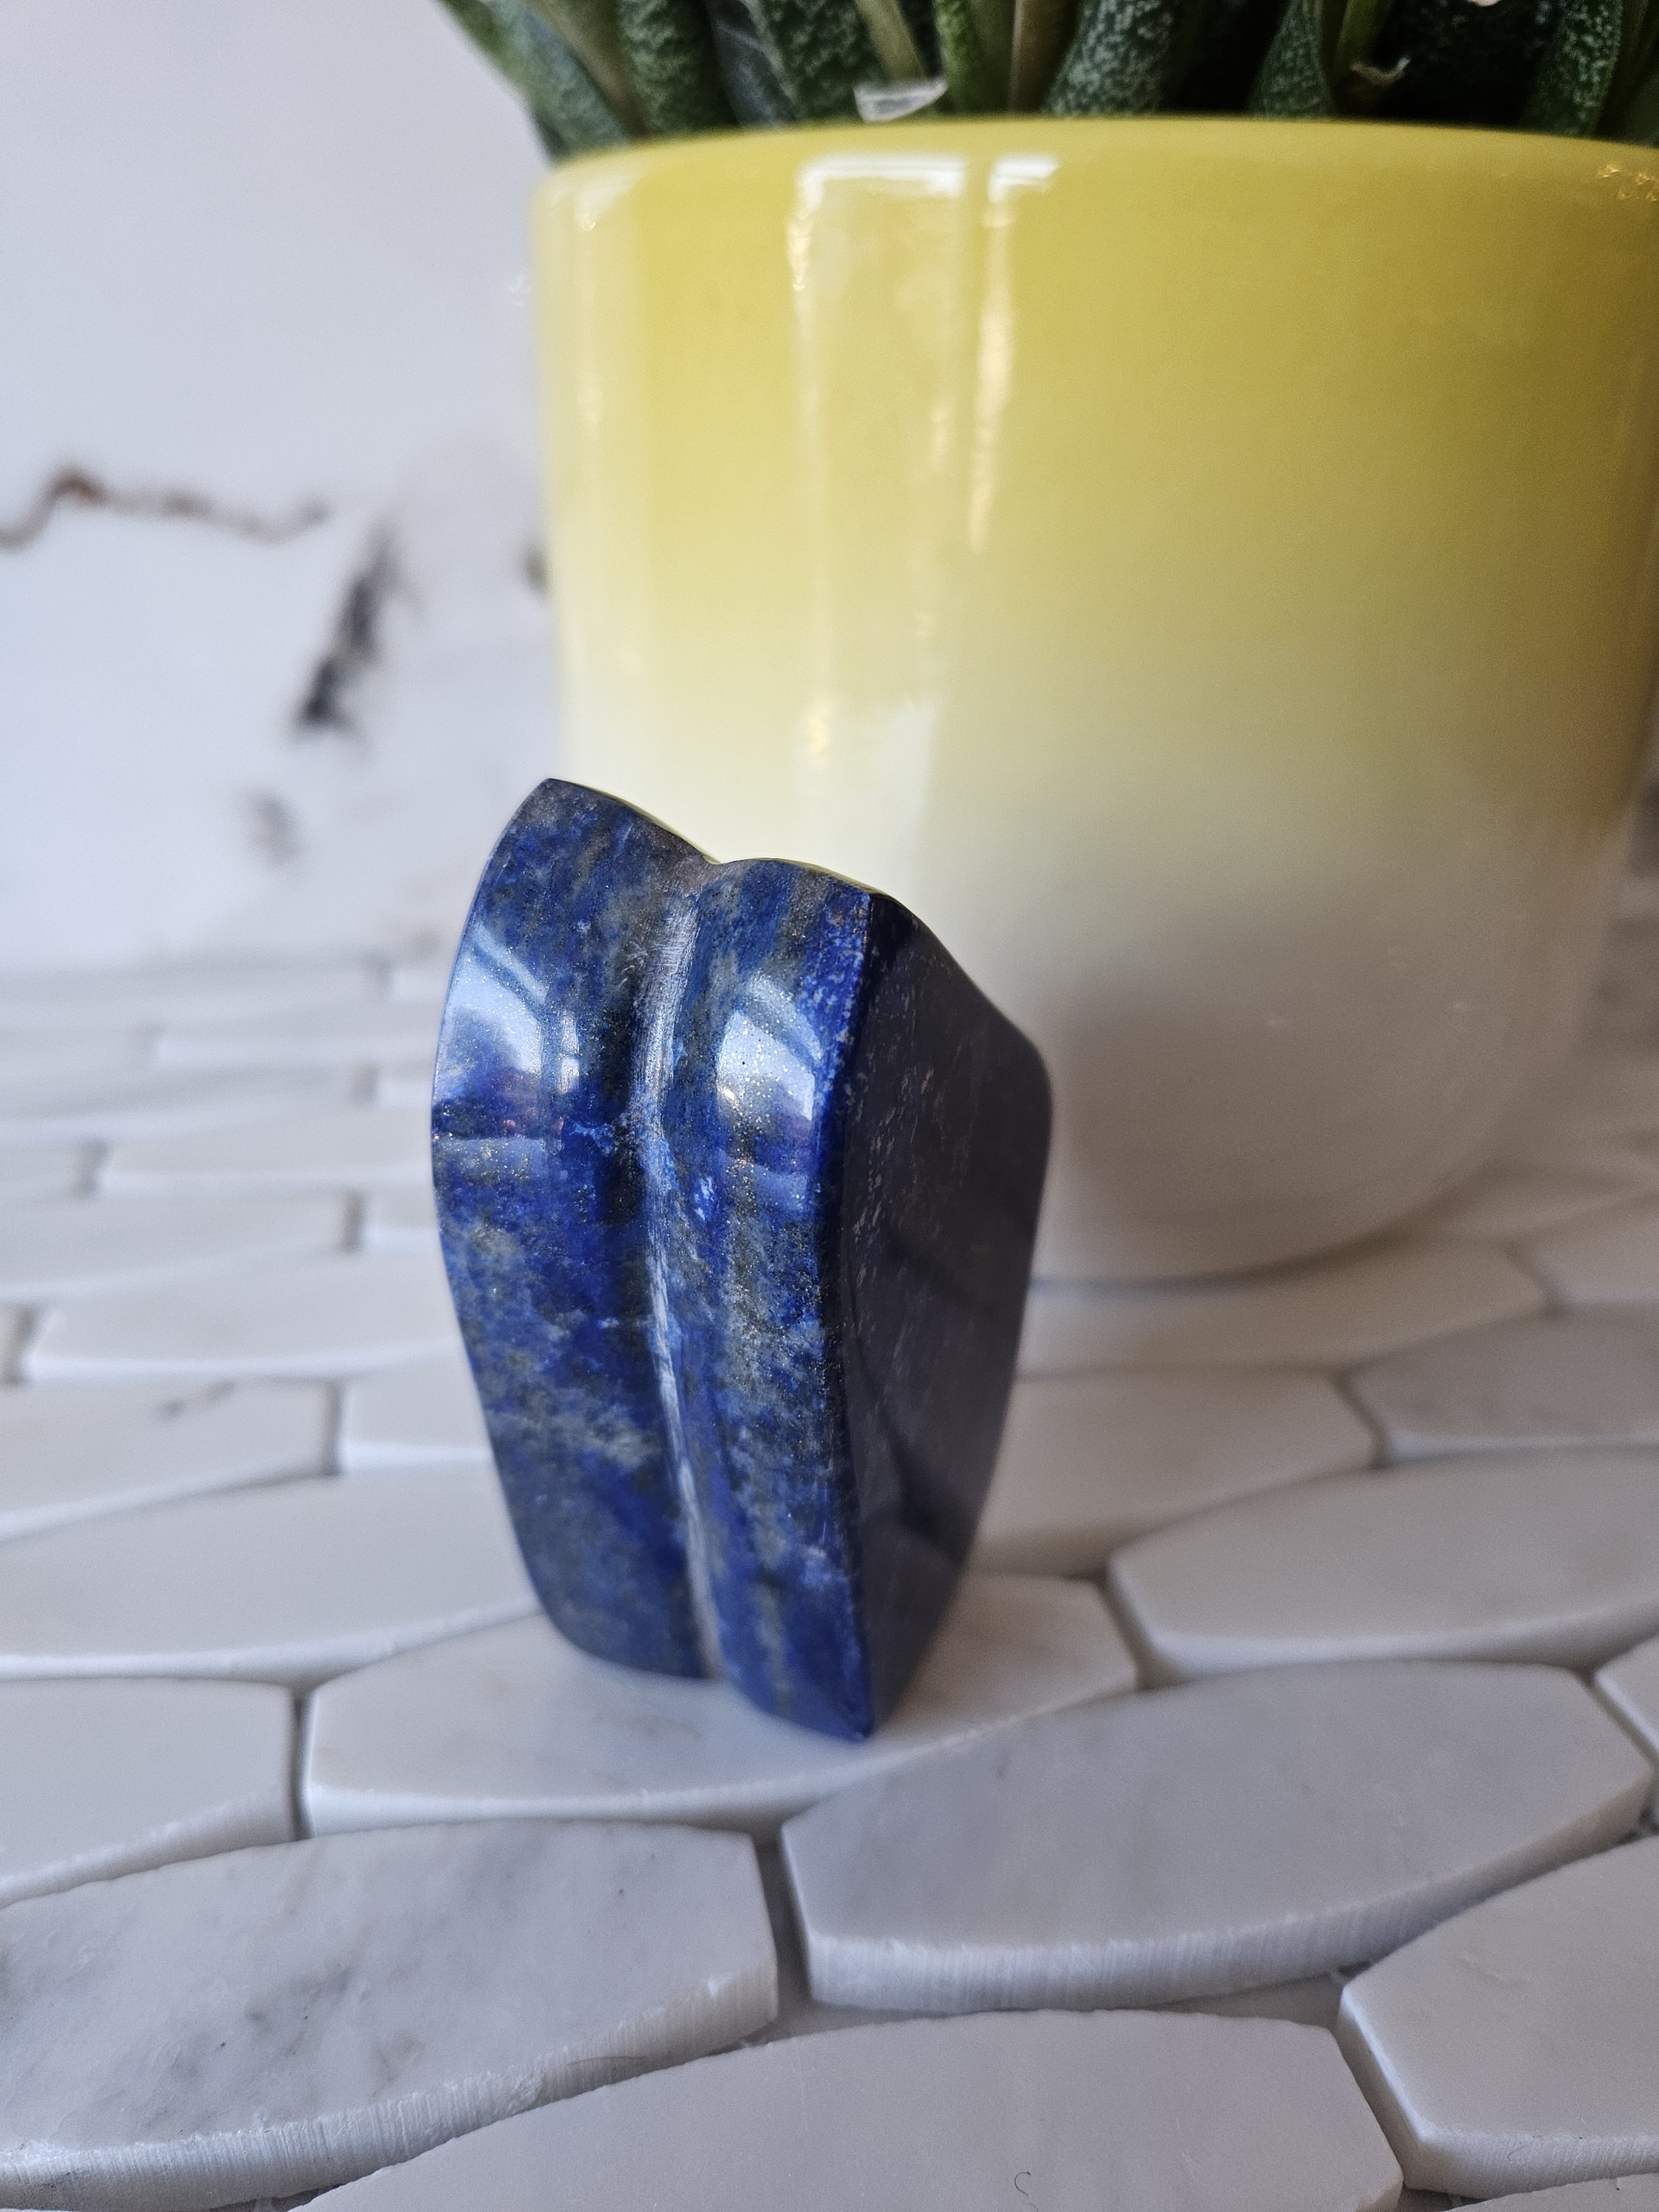 Free Form A+++ Lapis Lazuli , Freeform Stone With a Polished Tumble From Afghanistan | Authentic Gemstone With Blue Crystal